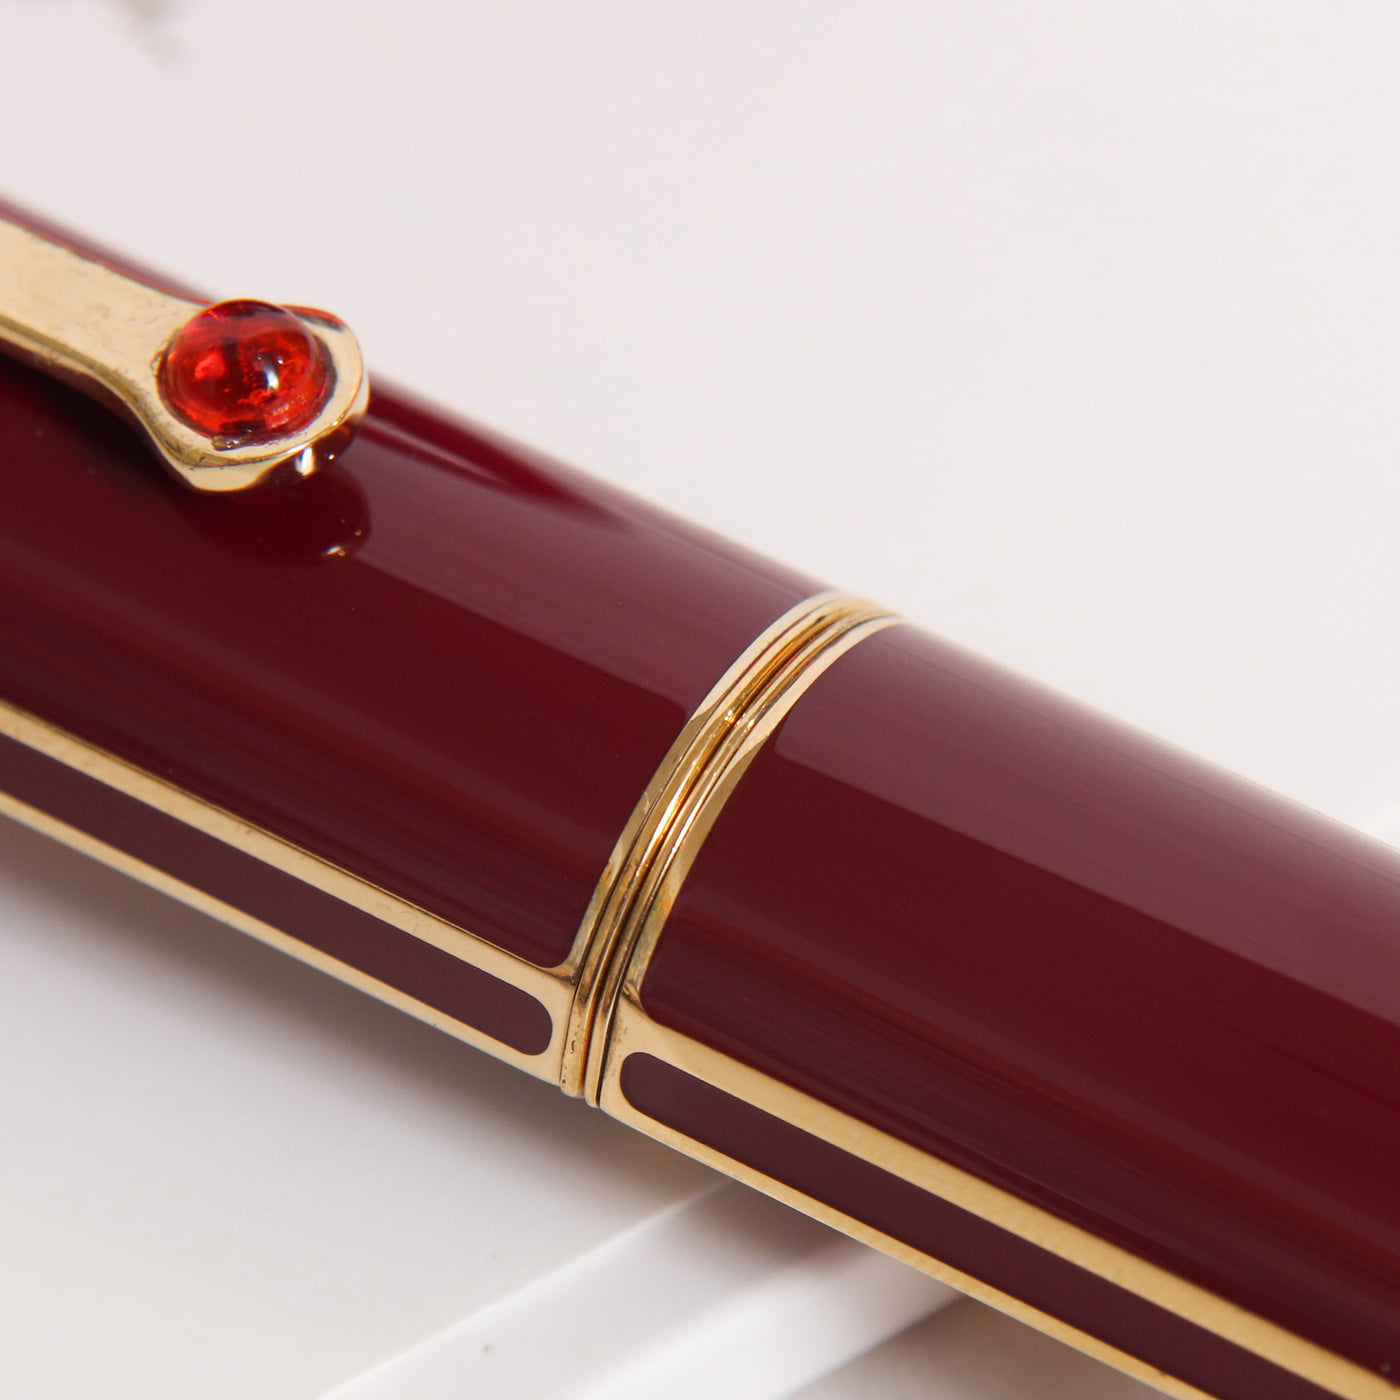 ST Dupont Mon Dupont Karl Lagerfeld Lotus Red Rollerball Pen - Preowned Center Band